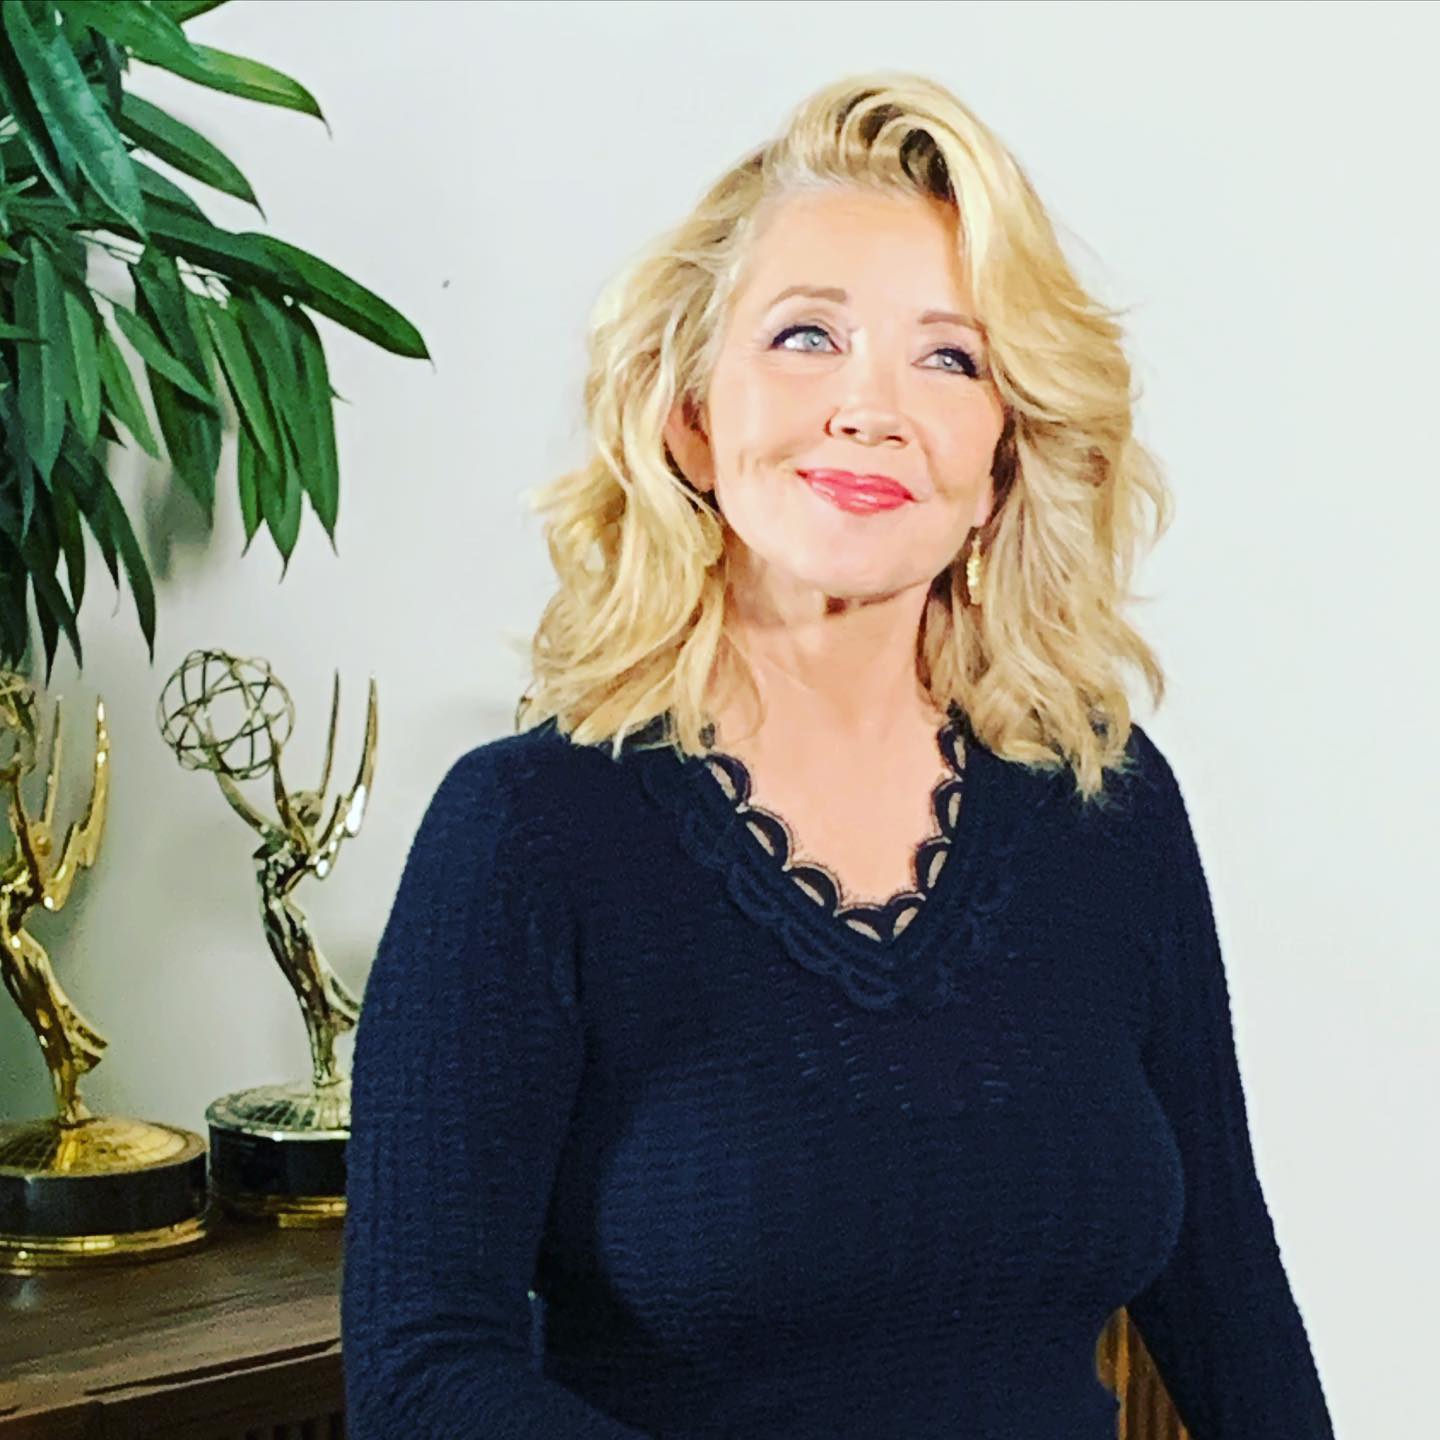 Melody Thomas Scott wearing a black top with her Daytime Emmy Award trophy on the shelf.